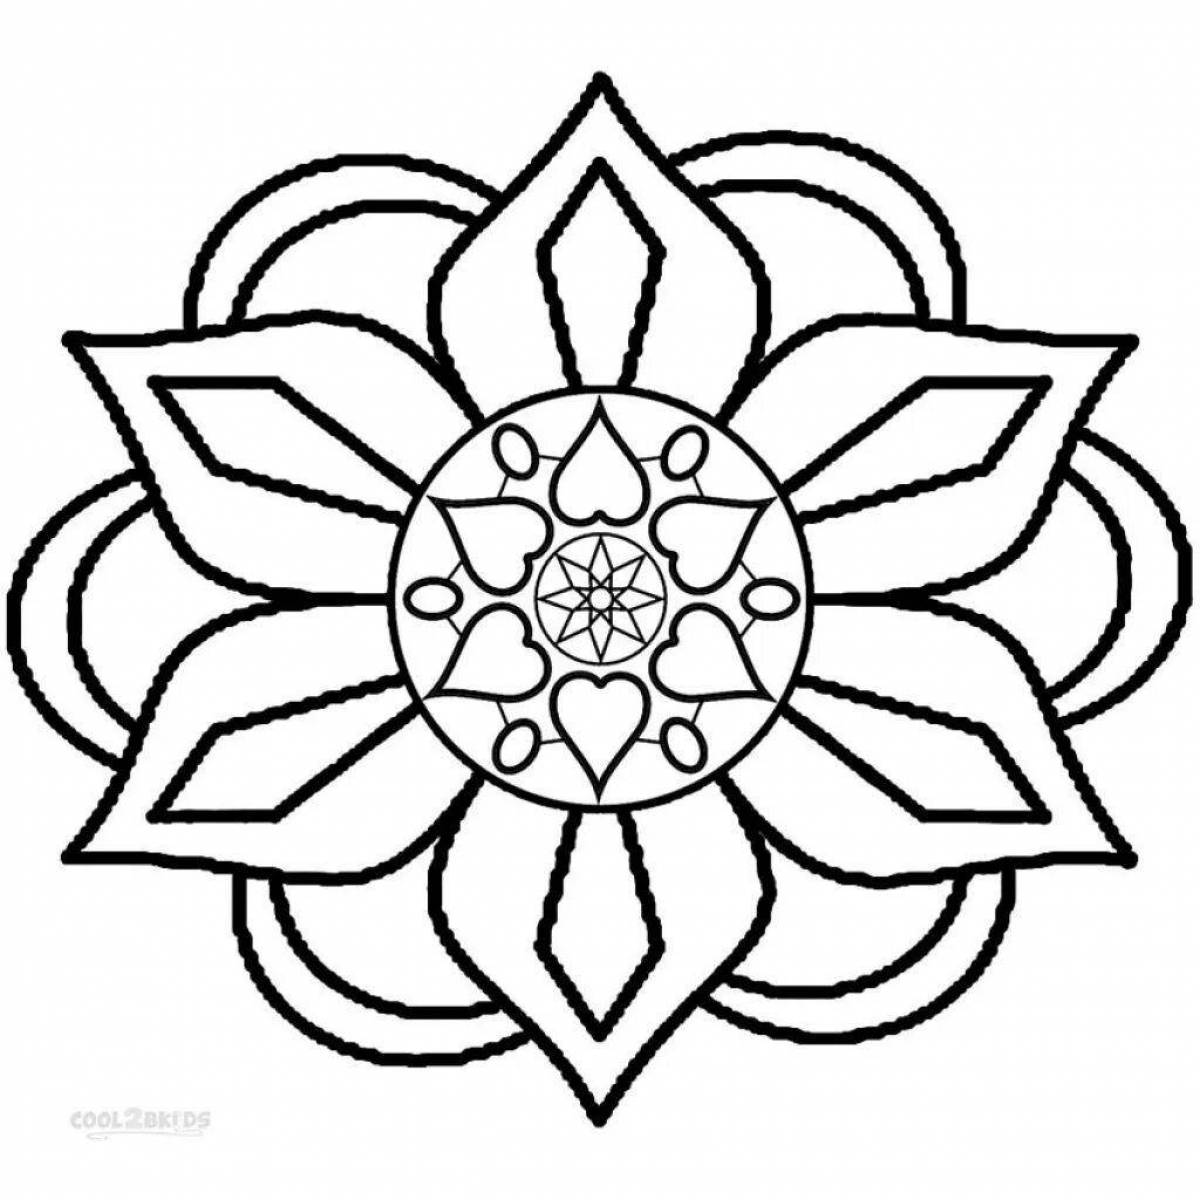 Fun coloring pages with patterns and ornaments for children